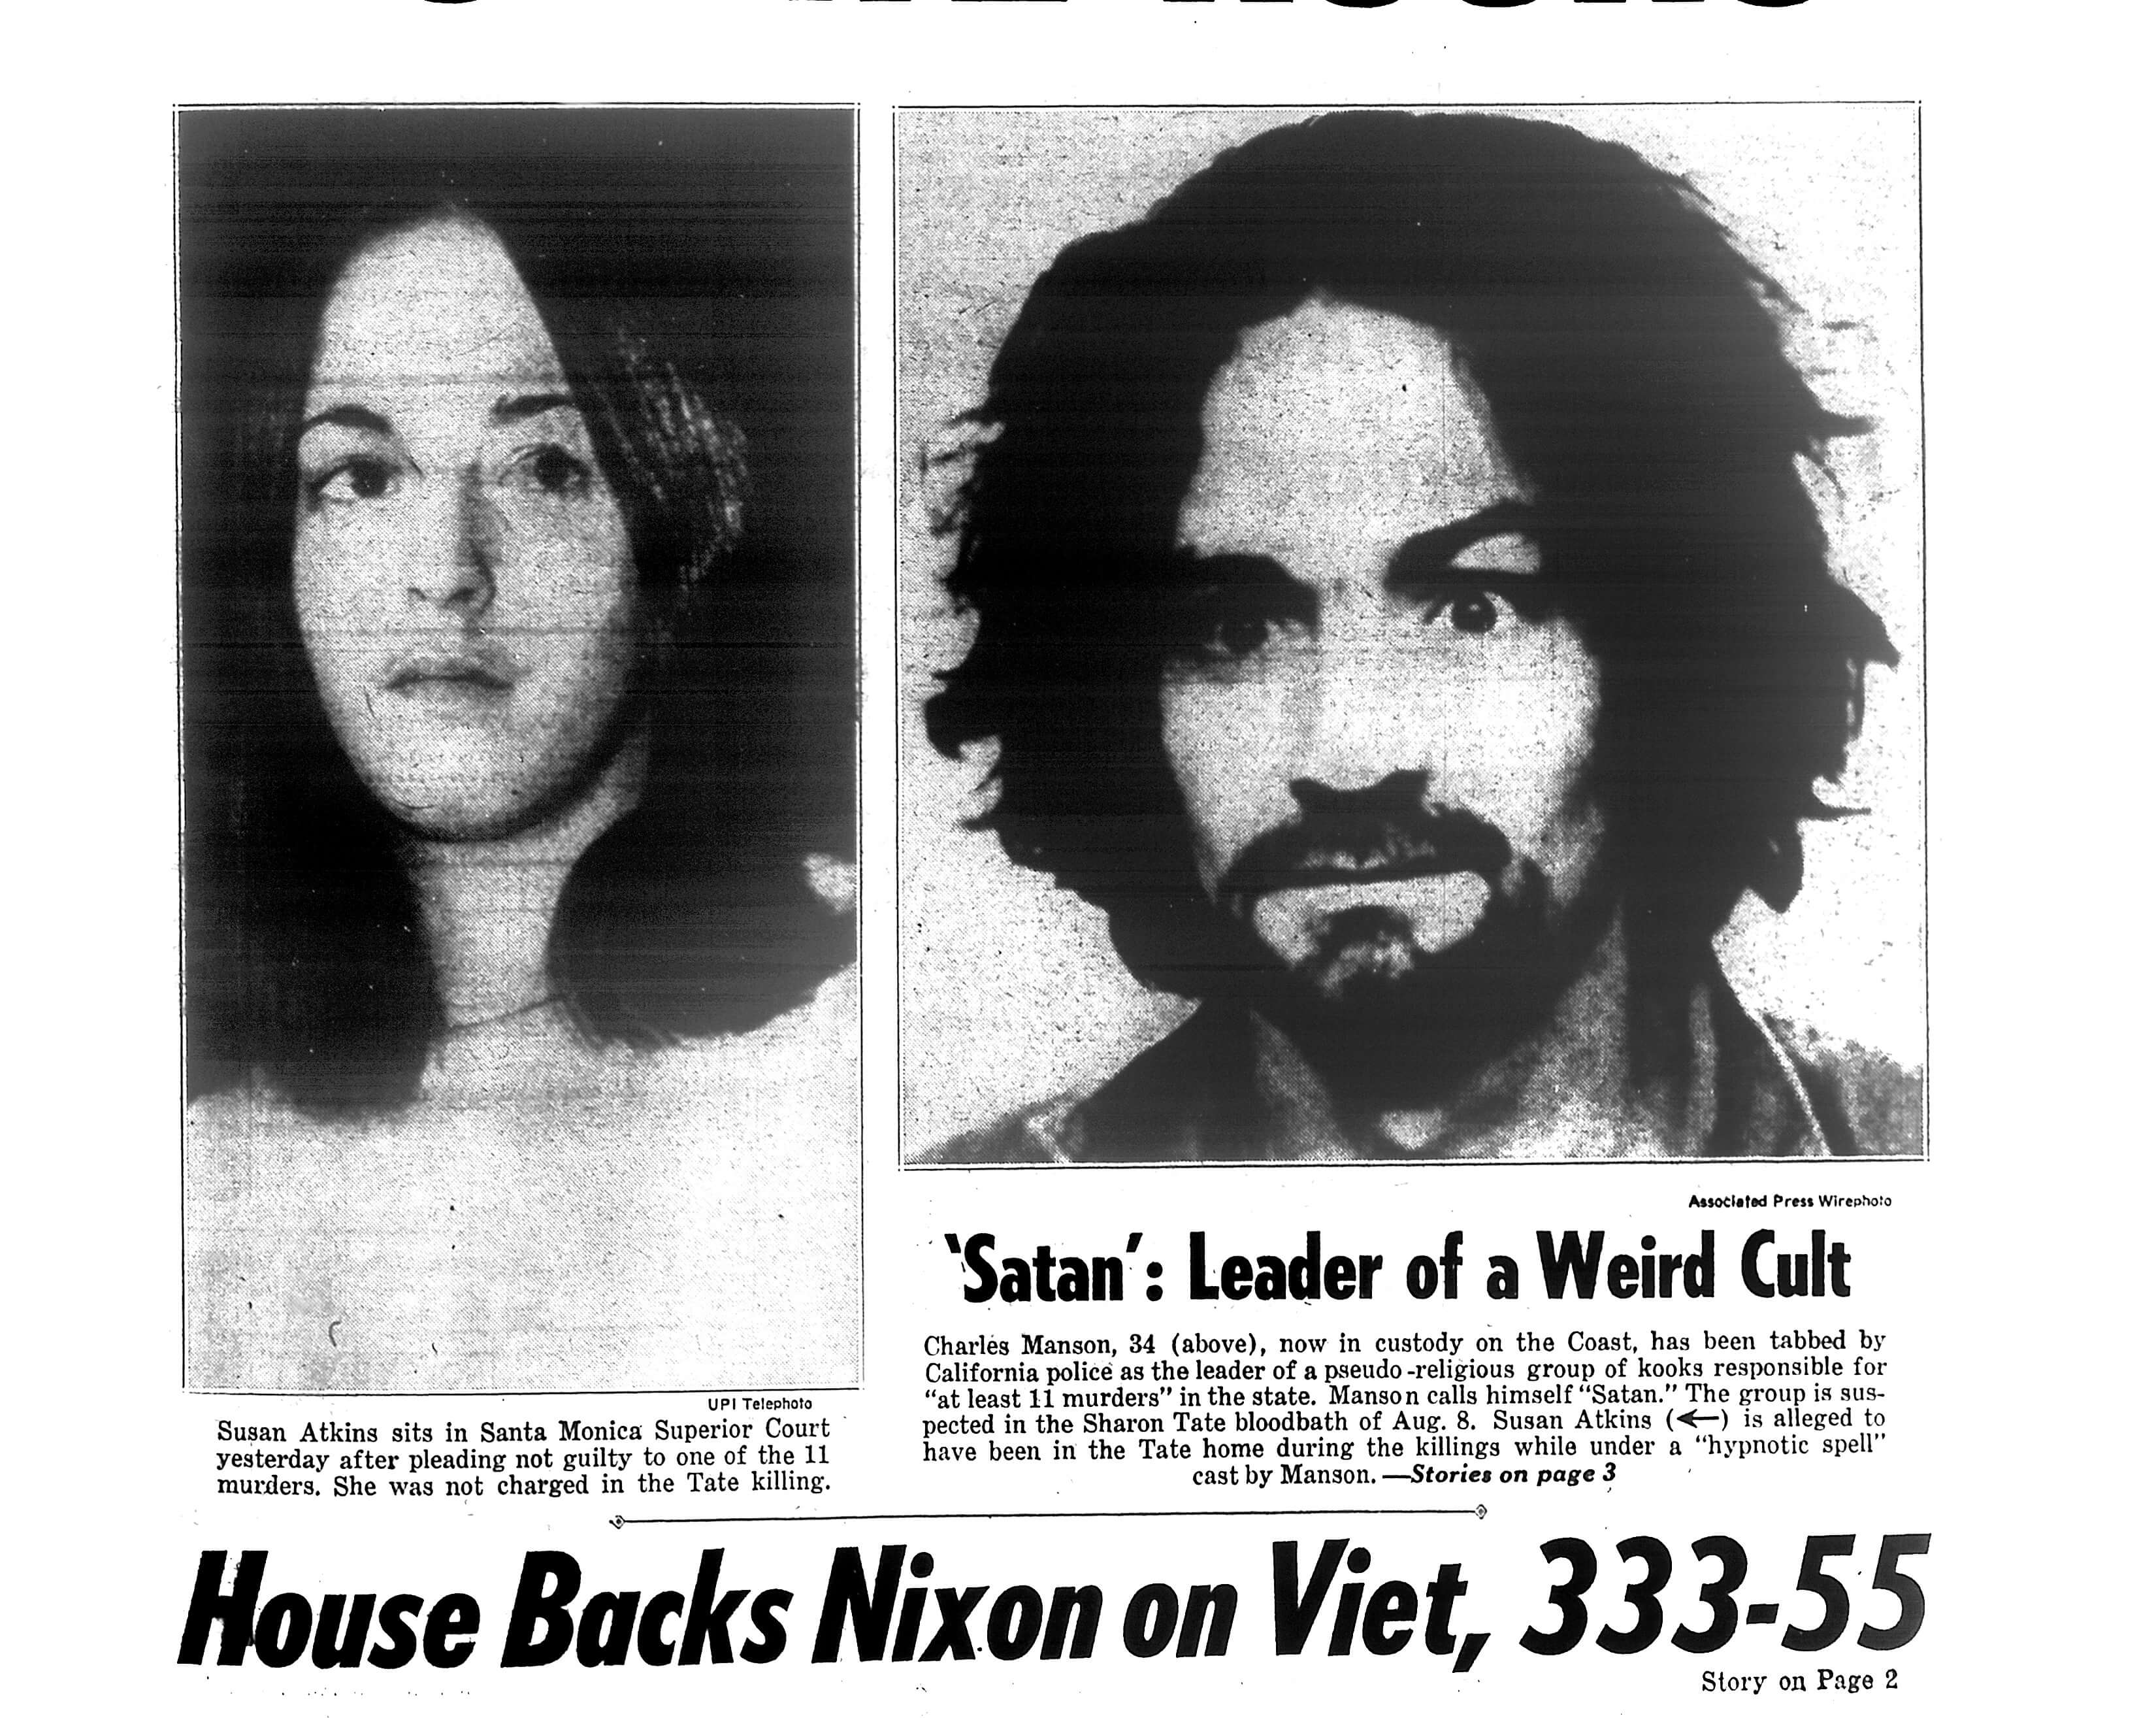 Susan Atkins and Charles Manson on the cover of a newspaper